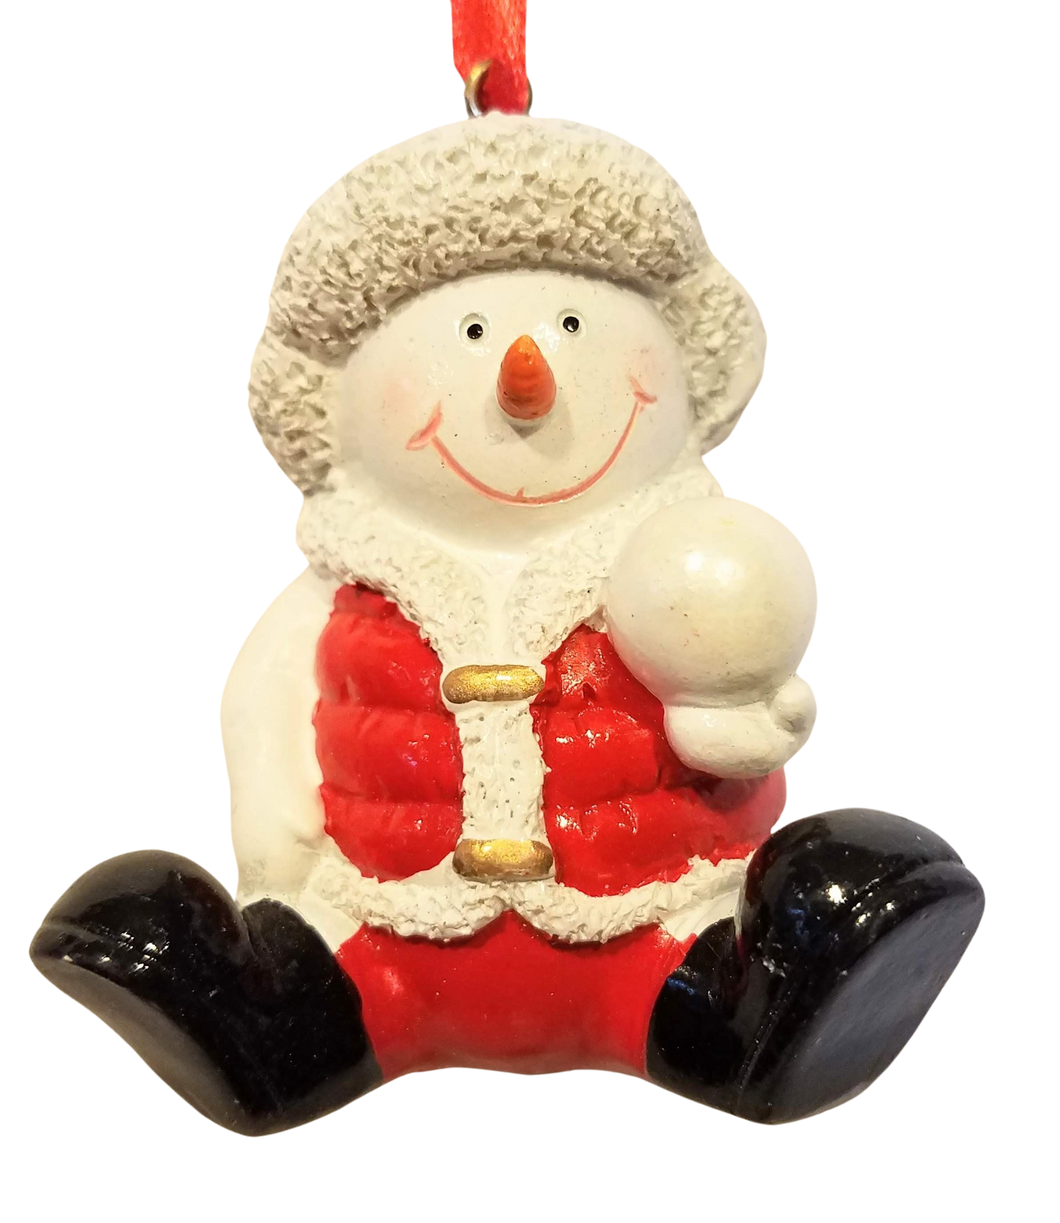 Snowman Ornament Wearing Red Jacket/Red Hat Sitting & Holding a Snowball 3